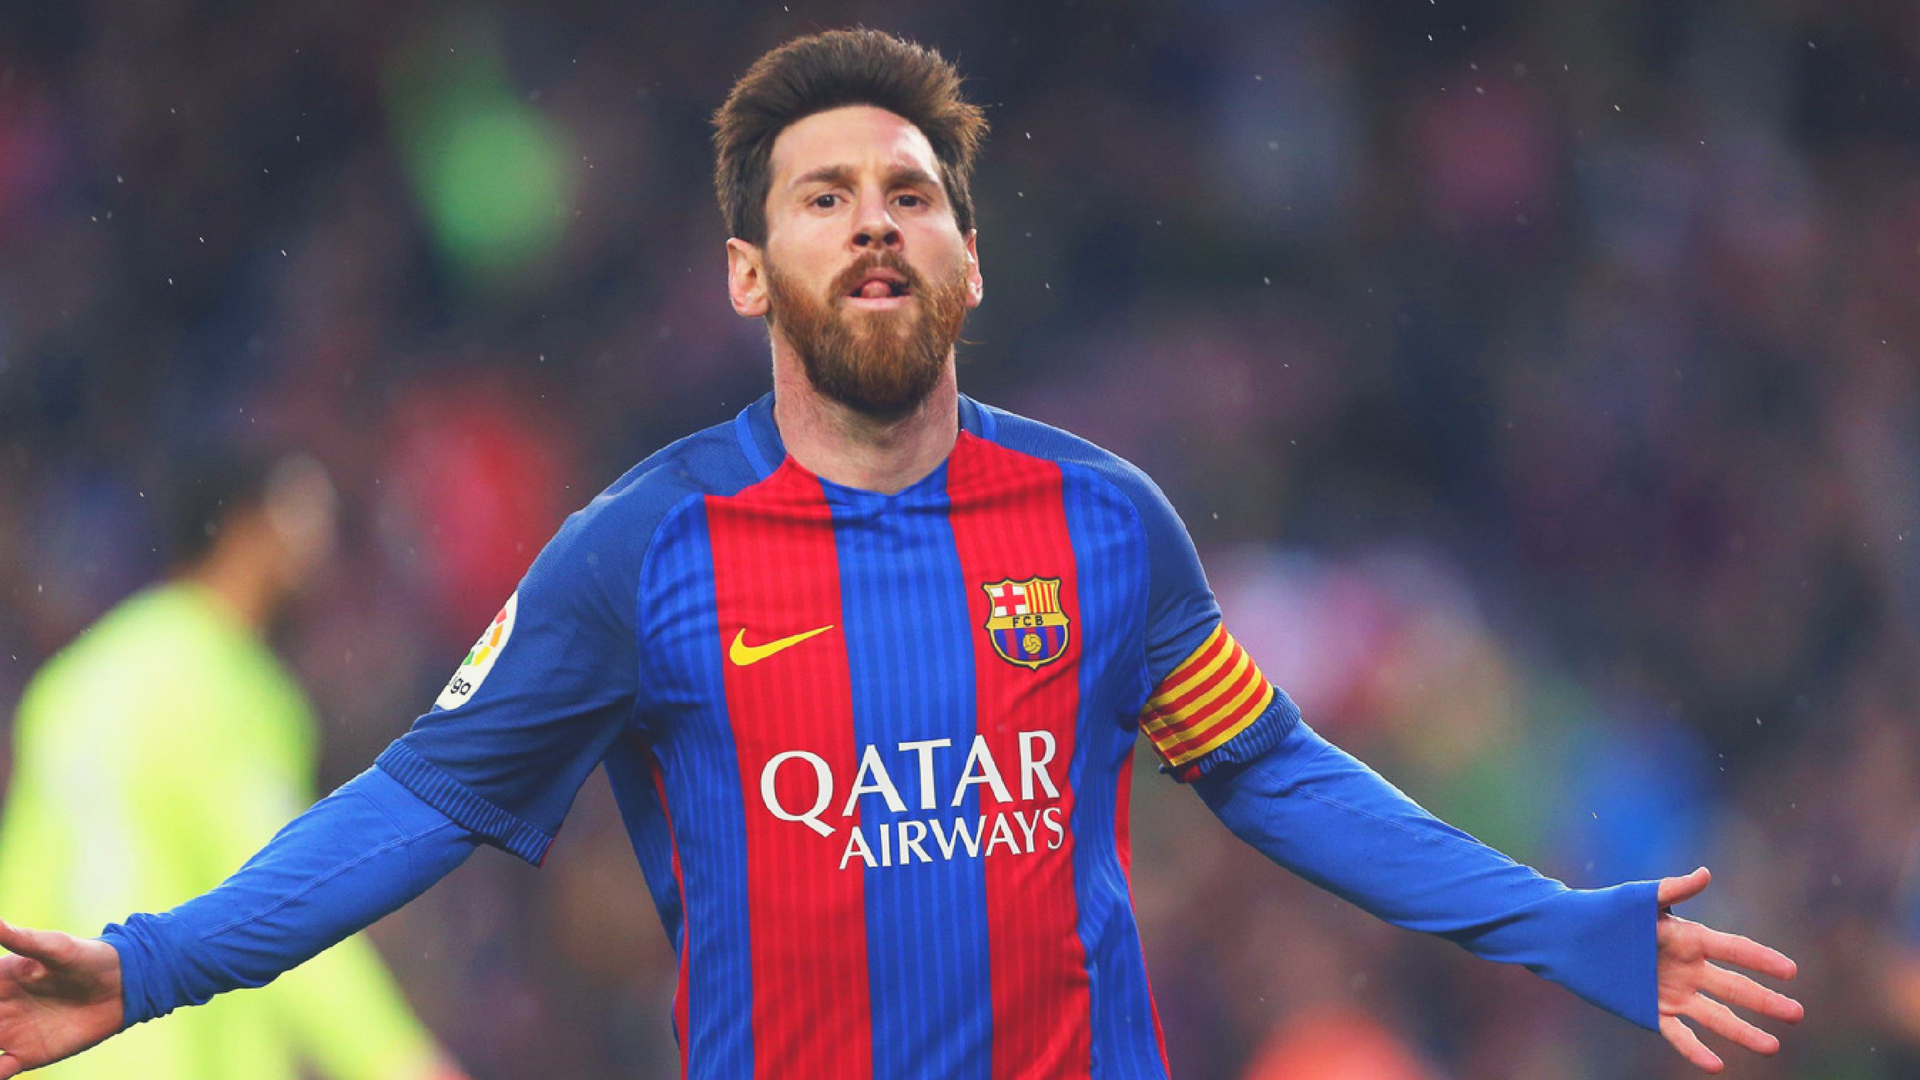 Lionel Messi Wallpapers Download High Quality Hd Image - Messi 30 Lat - 1920x1080  Wallpaper 